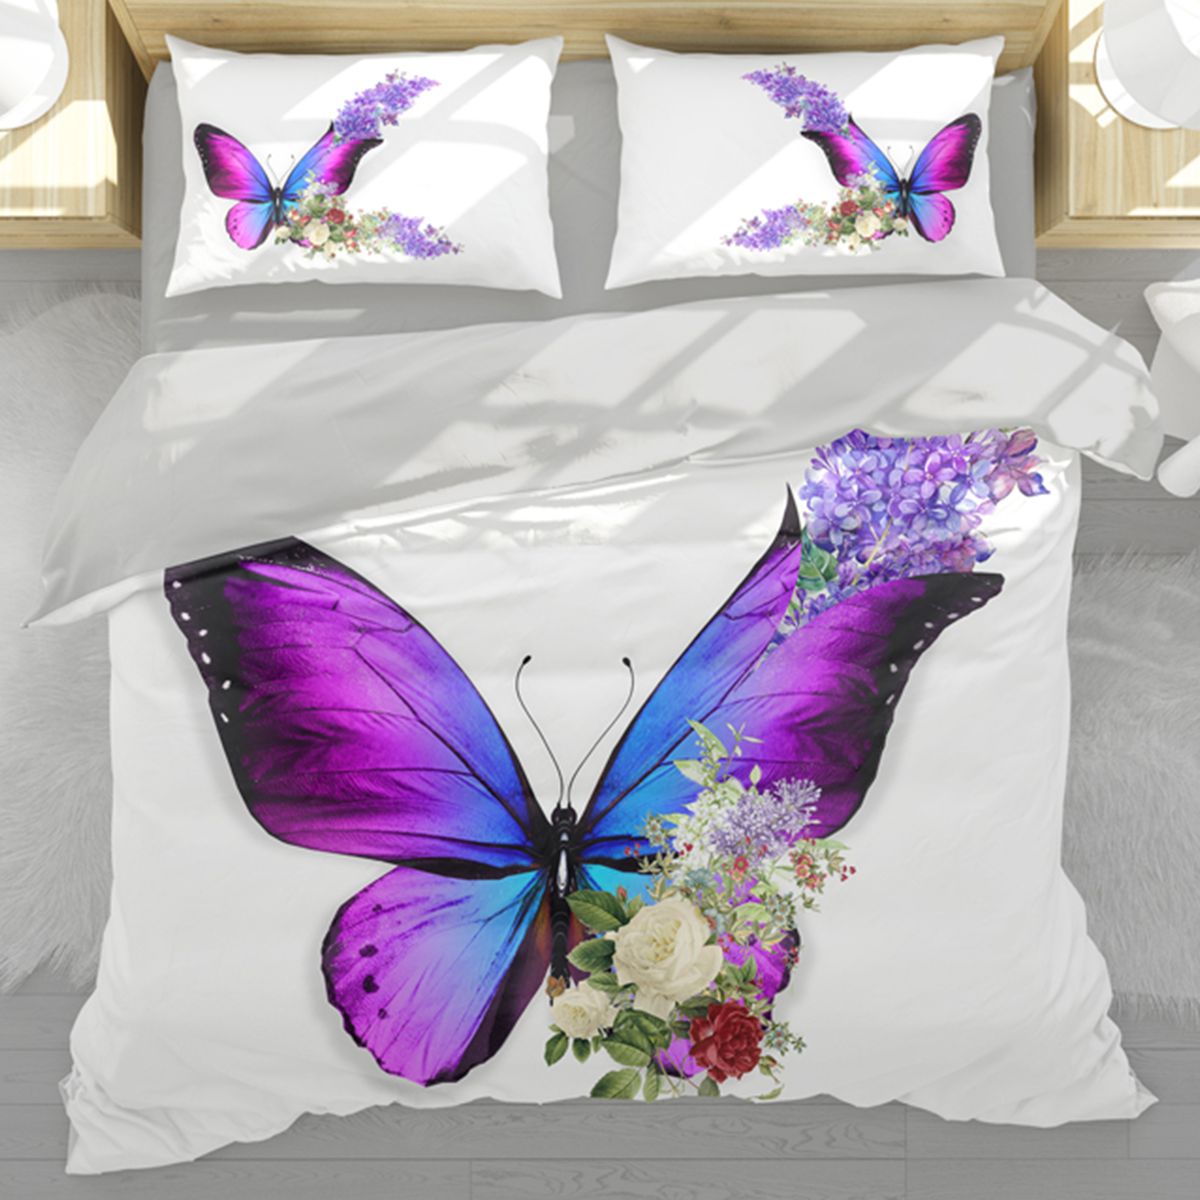 Butterfly Duvet Cover Set | Shop Today. Get it Tomorrow! | takealot.com